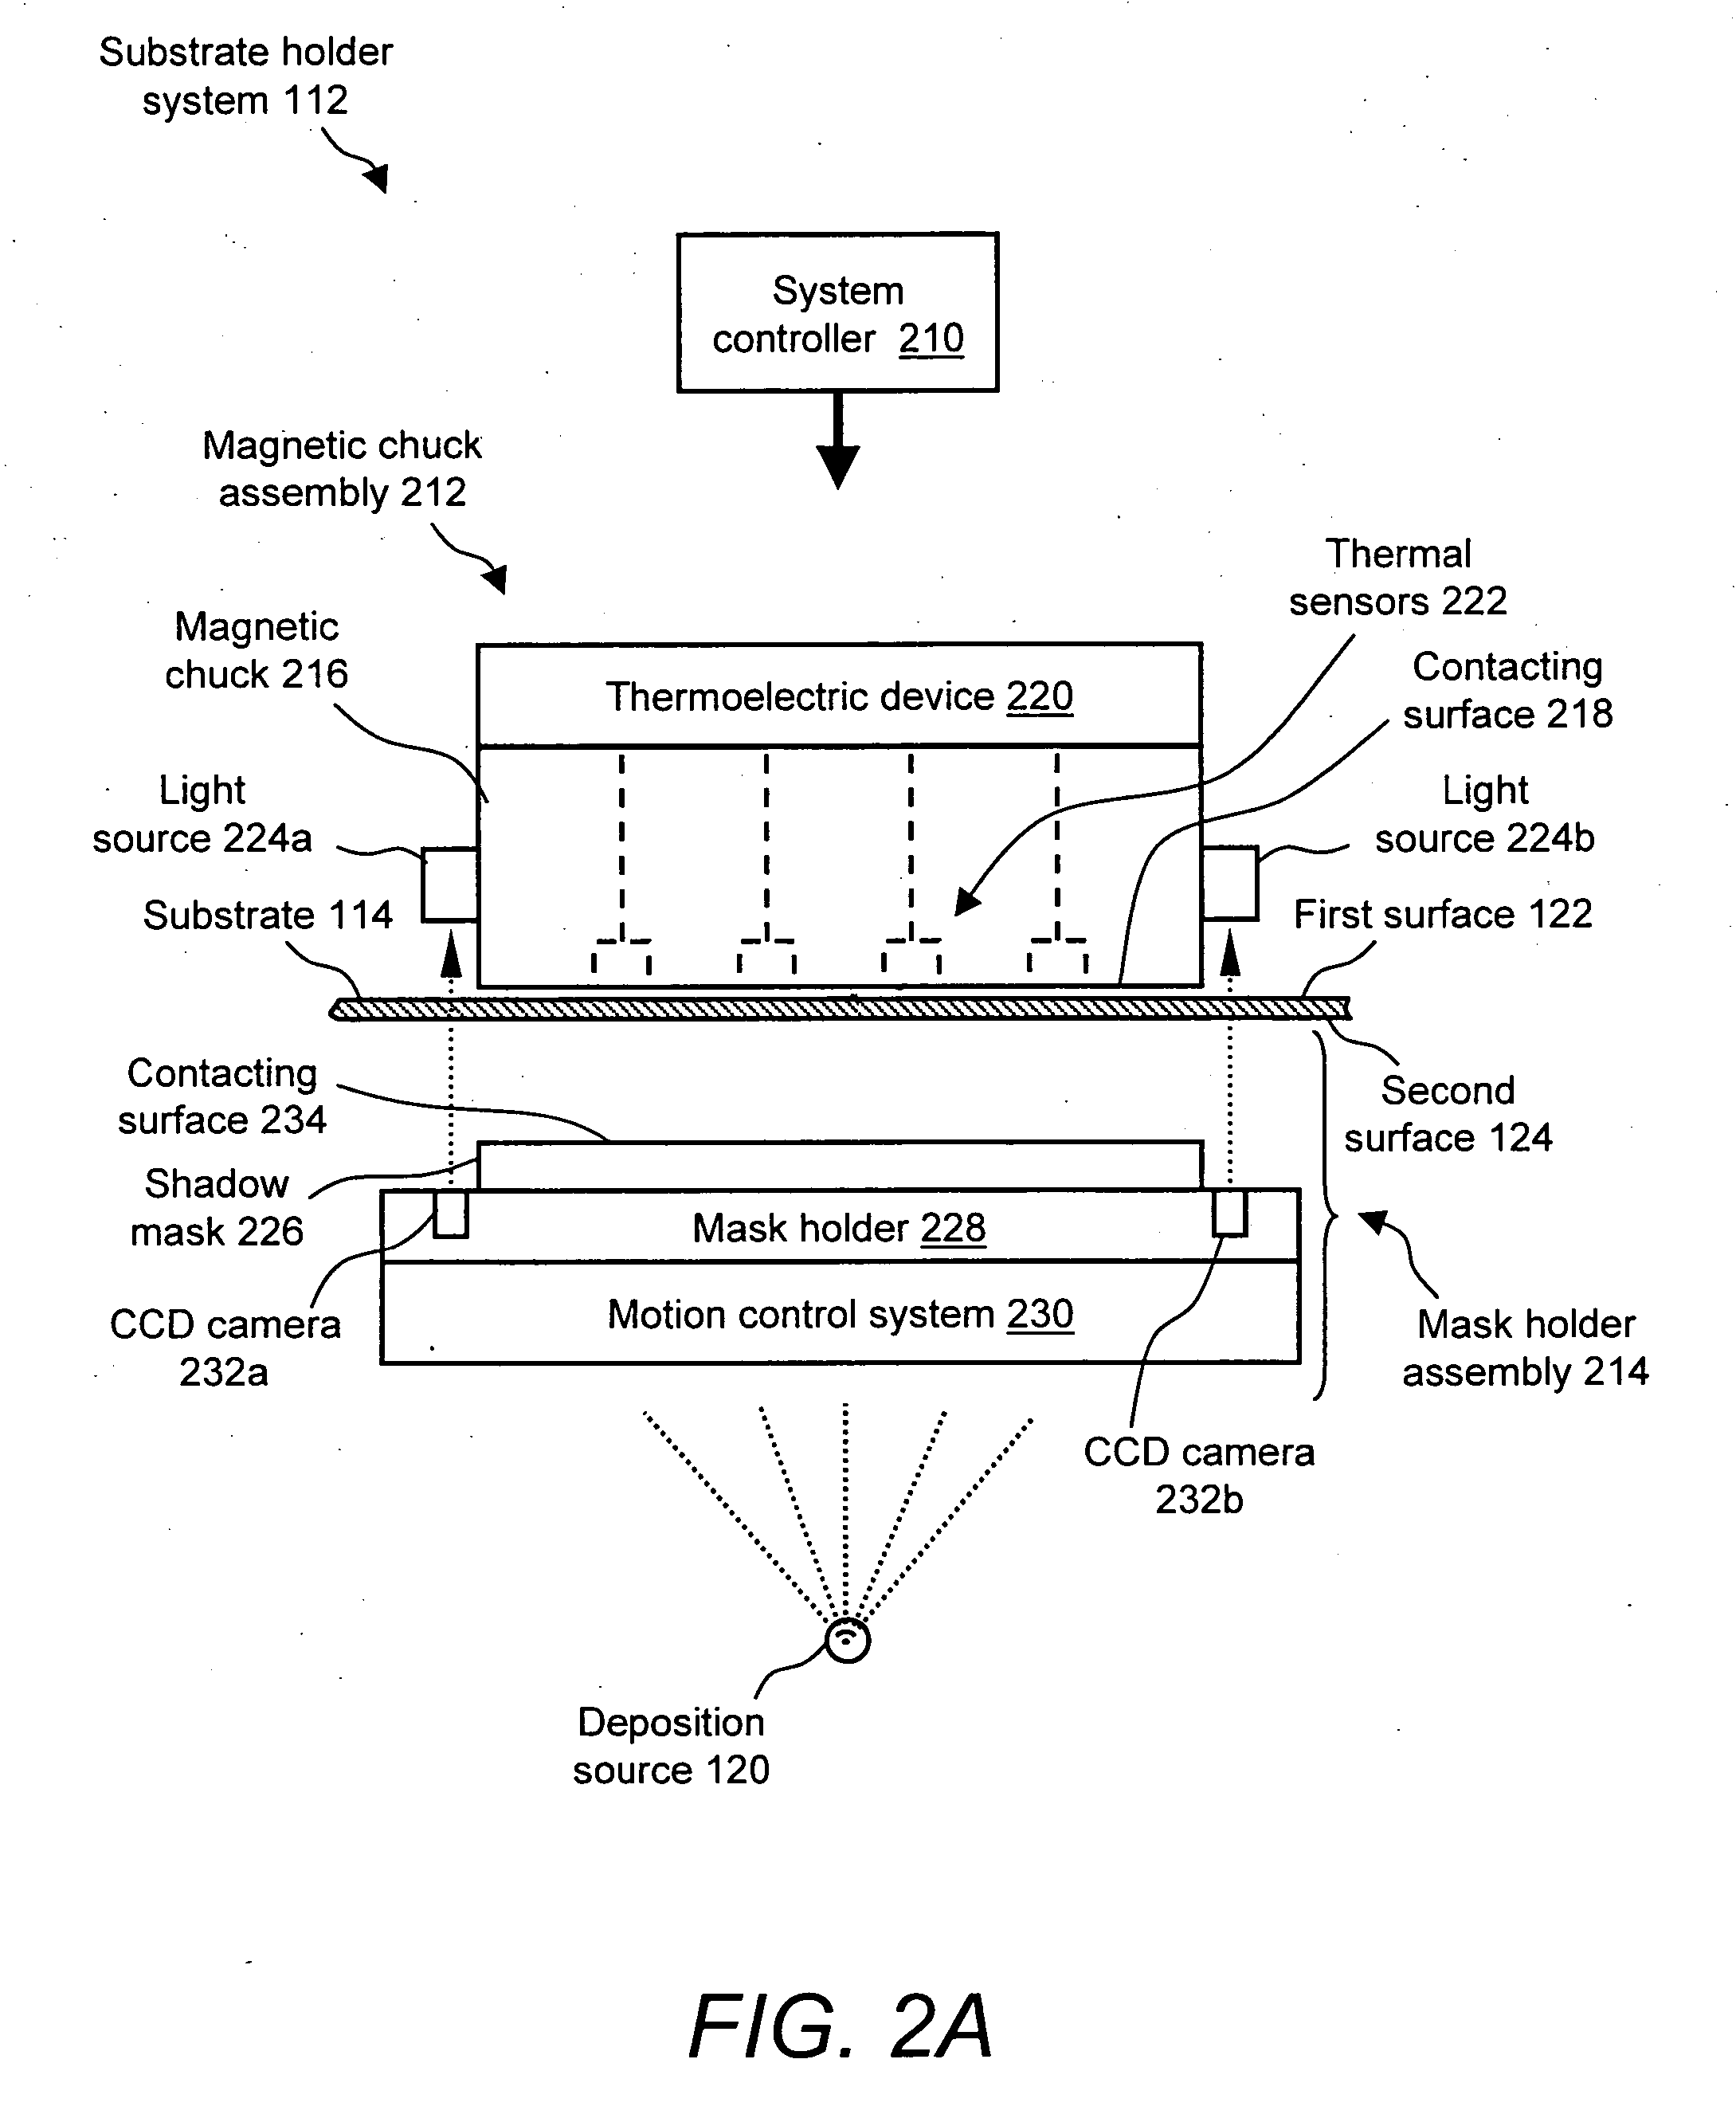 Substrate-to-mask alignment and securing system with temperature control for use in an automated shadow mask vacuum deposition process